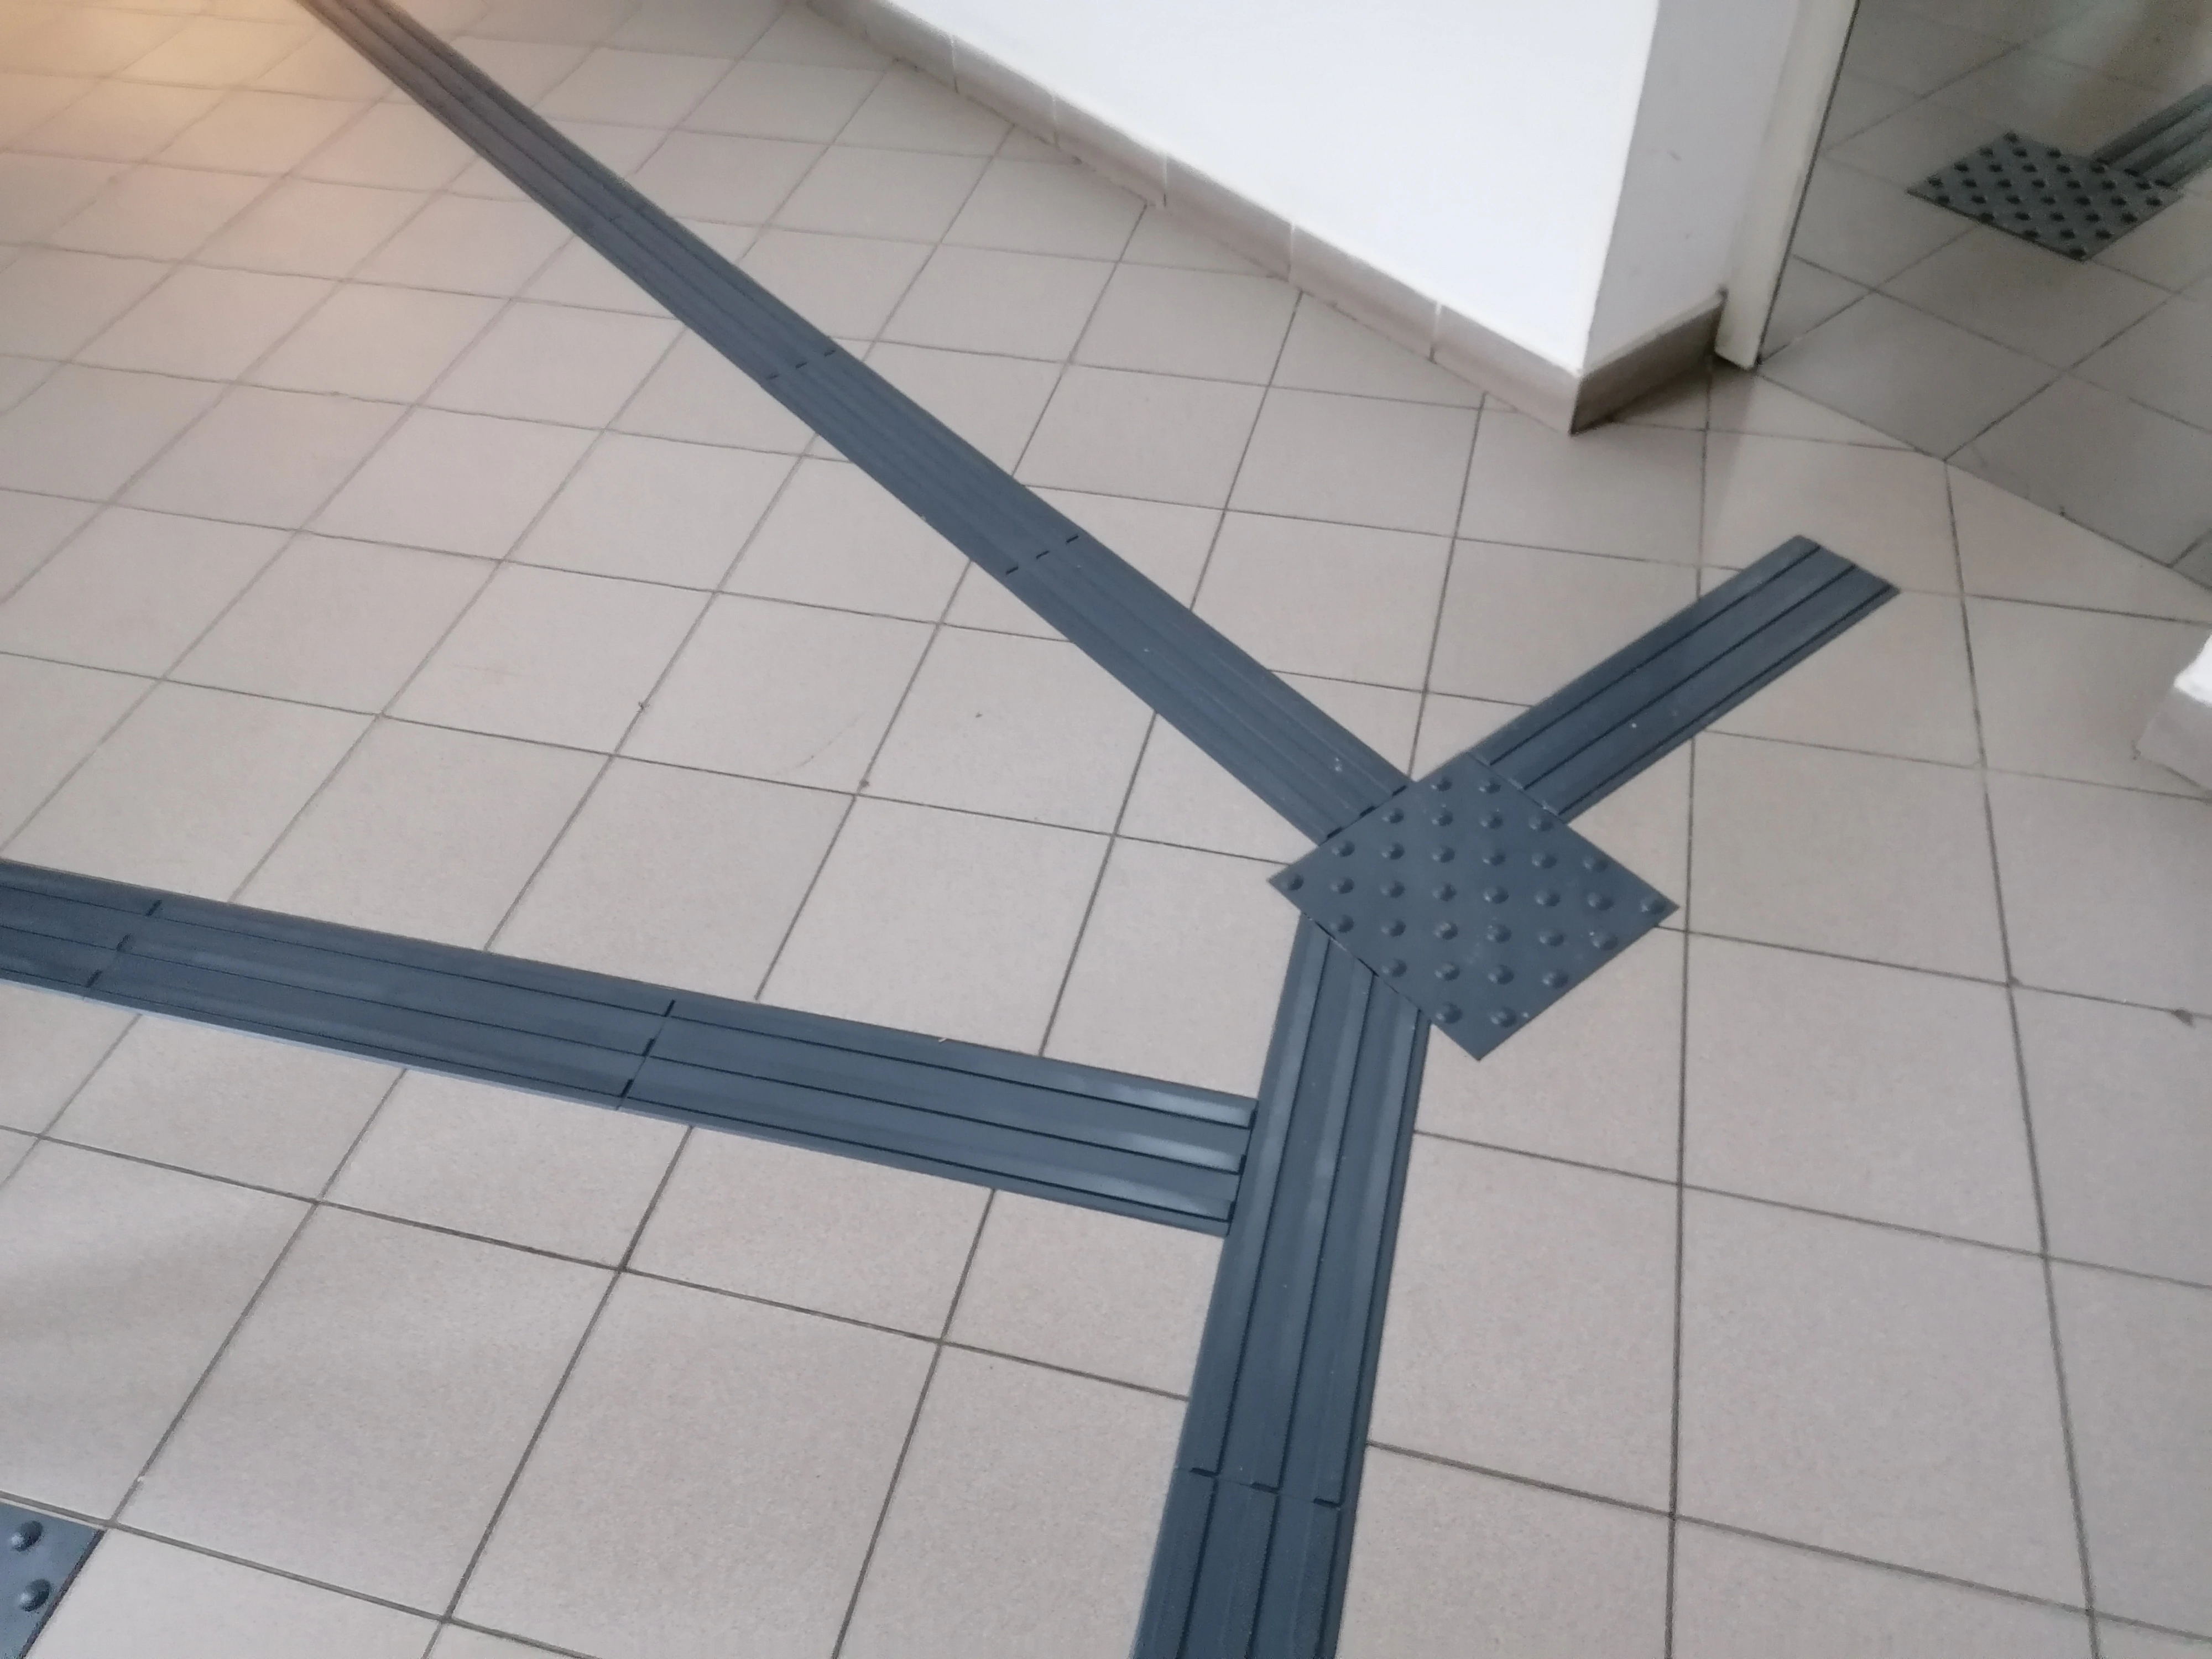 By judiciously installing tactile markings, the blind and visually impaired person can efficiently orient themselves, even in a complex space